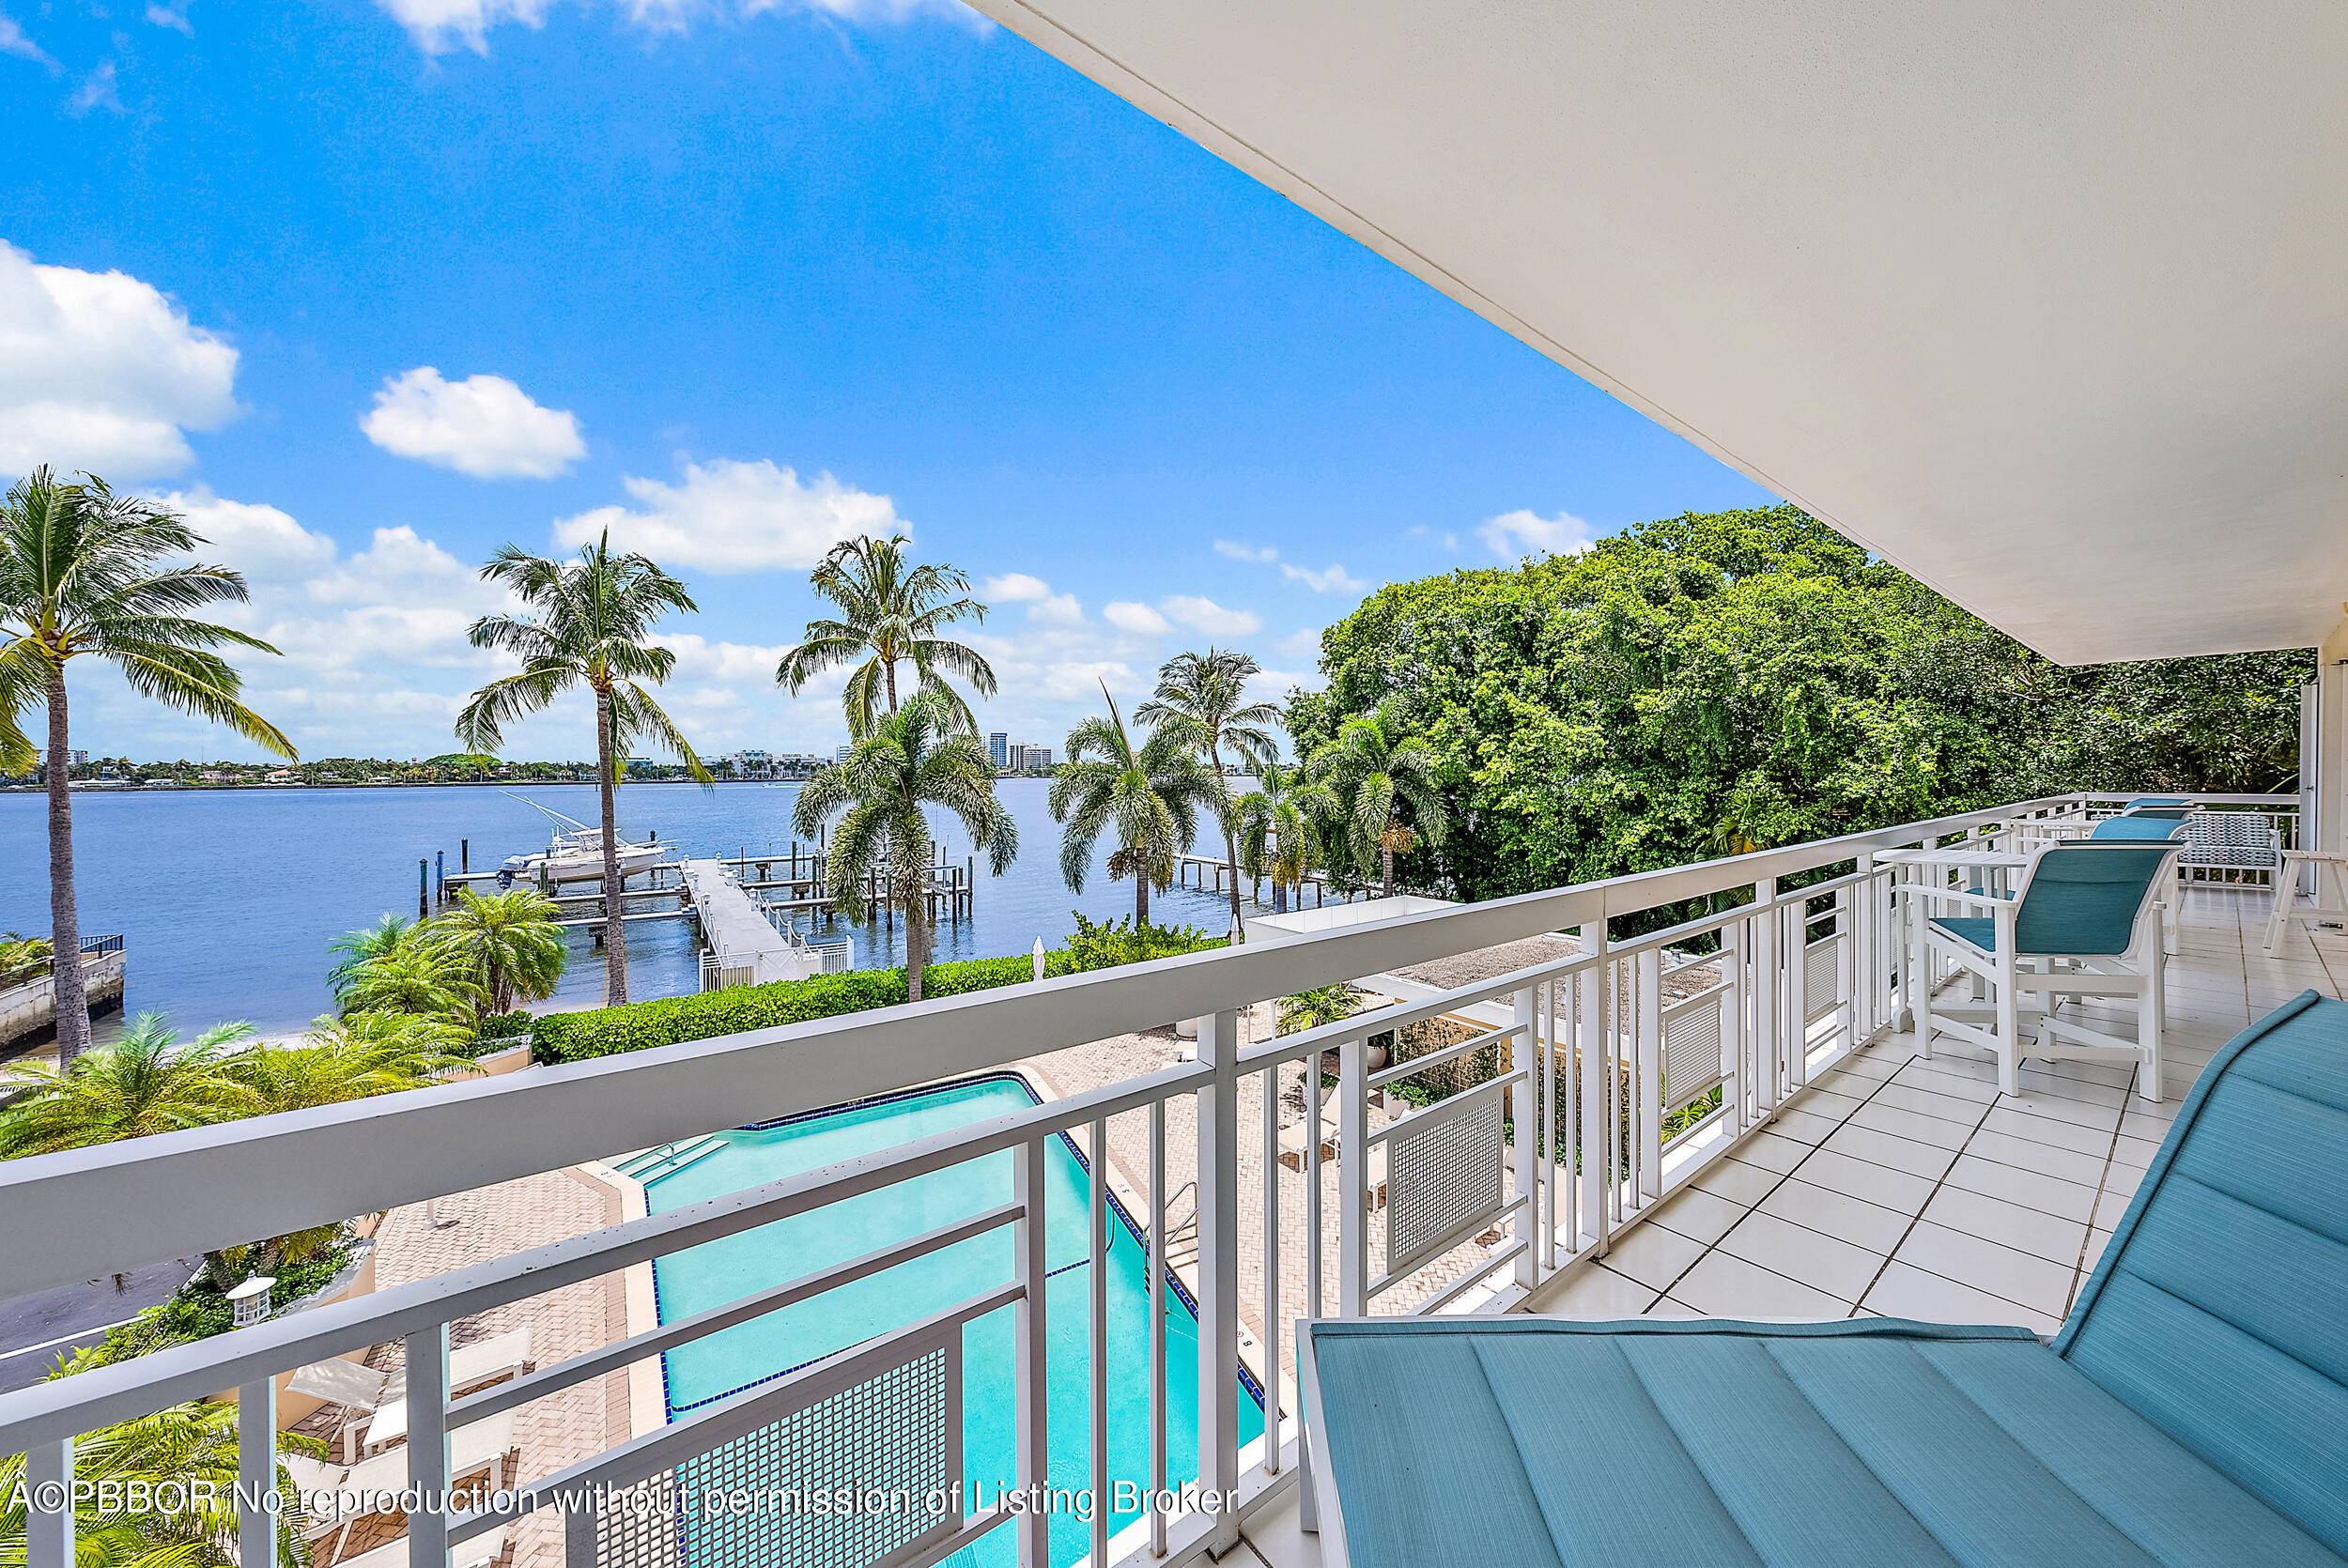 Enjoy unique panoramic intracoastal water views from the 60 ft balcony and nearly all rooms of this three bedroom, 2.